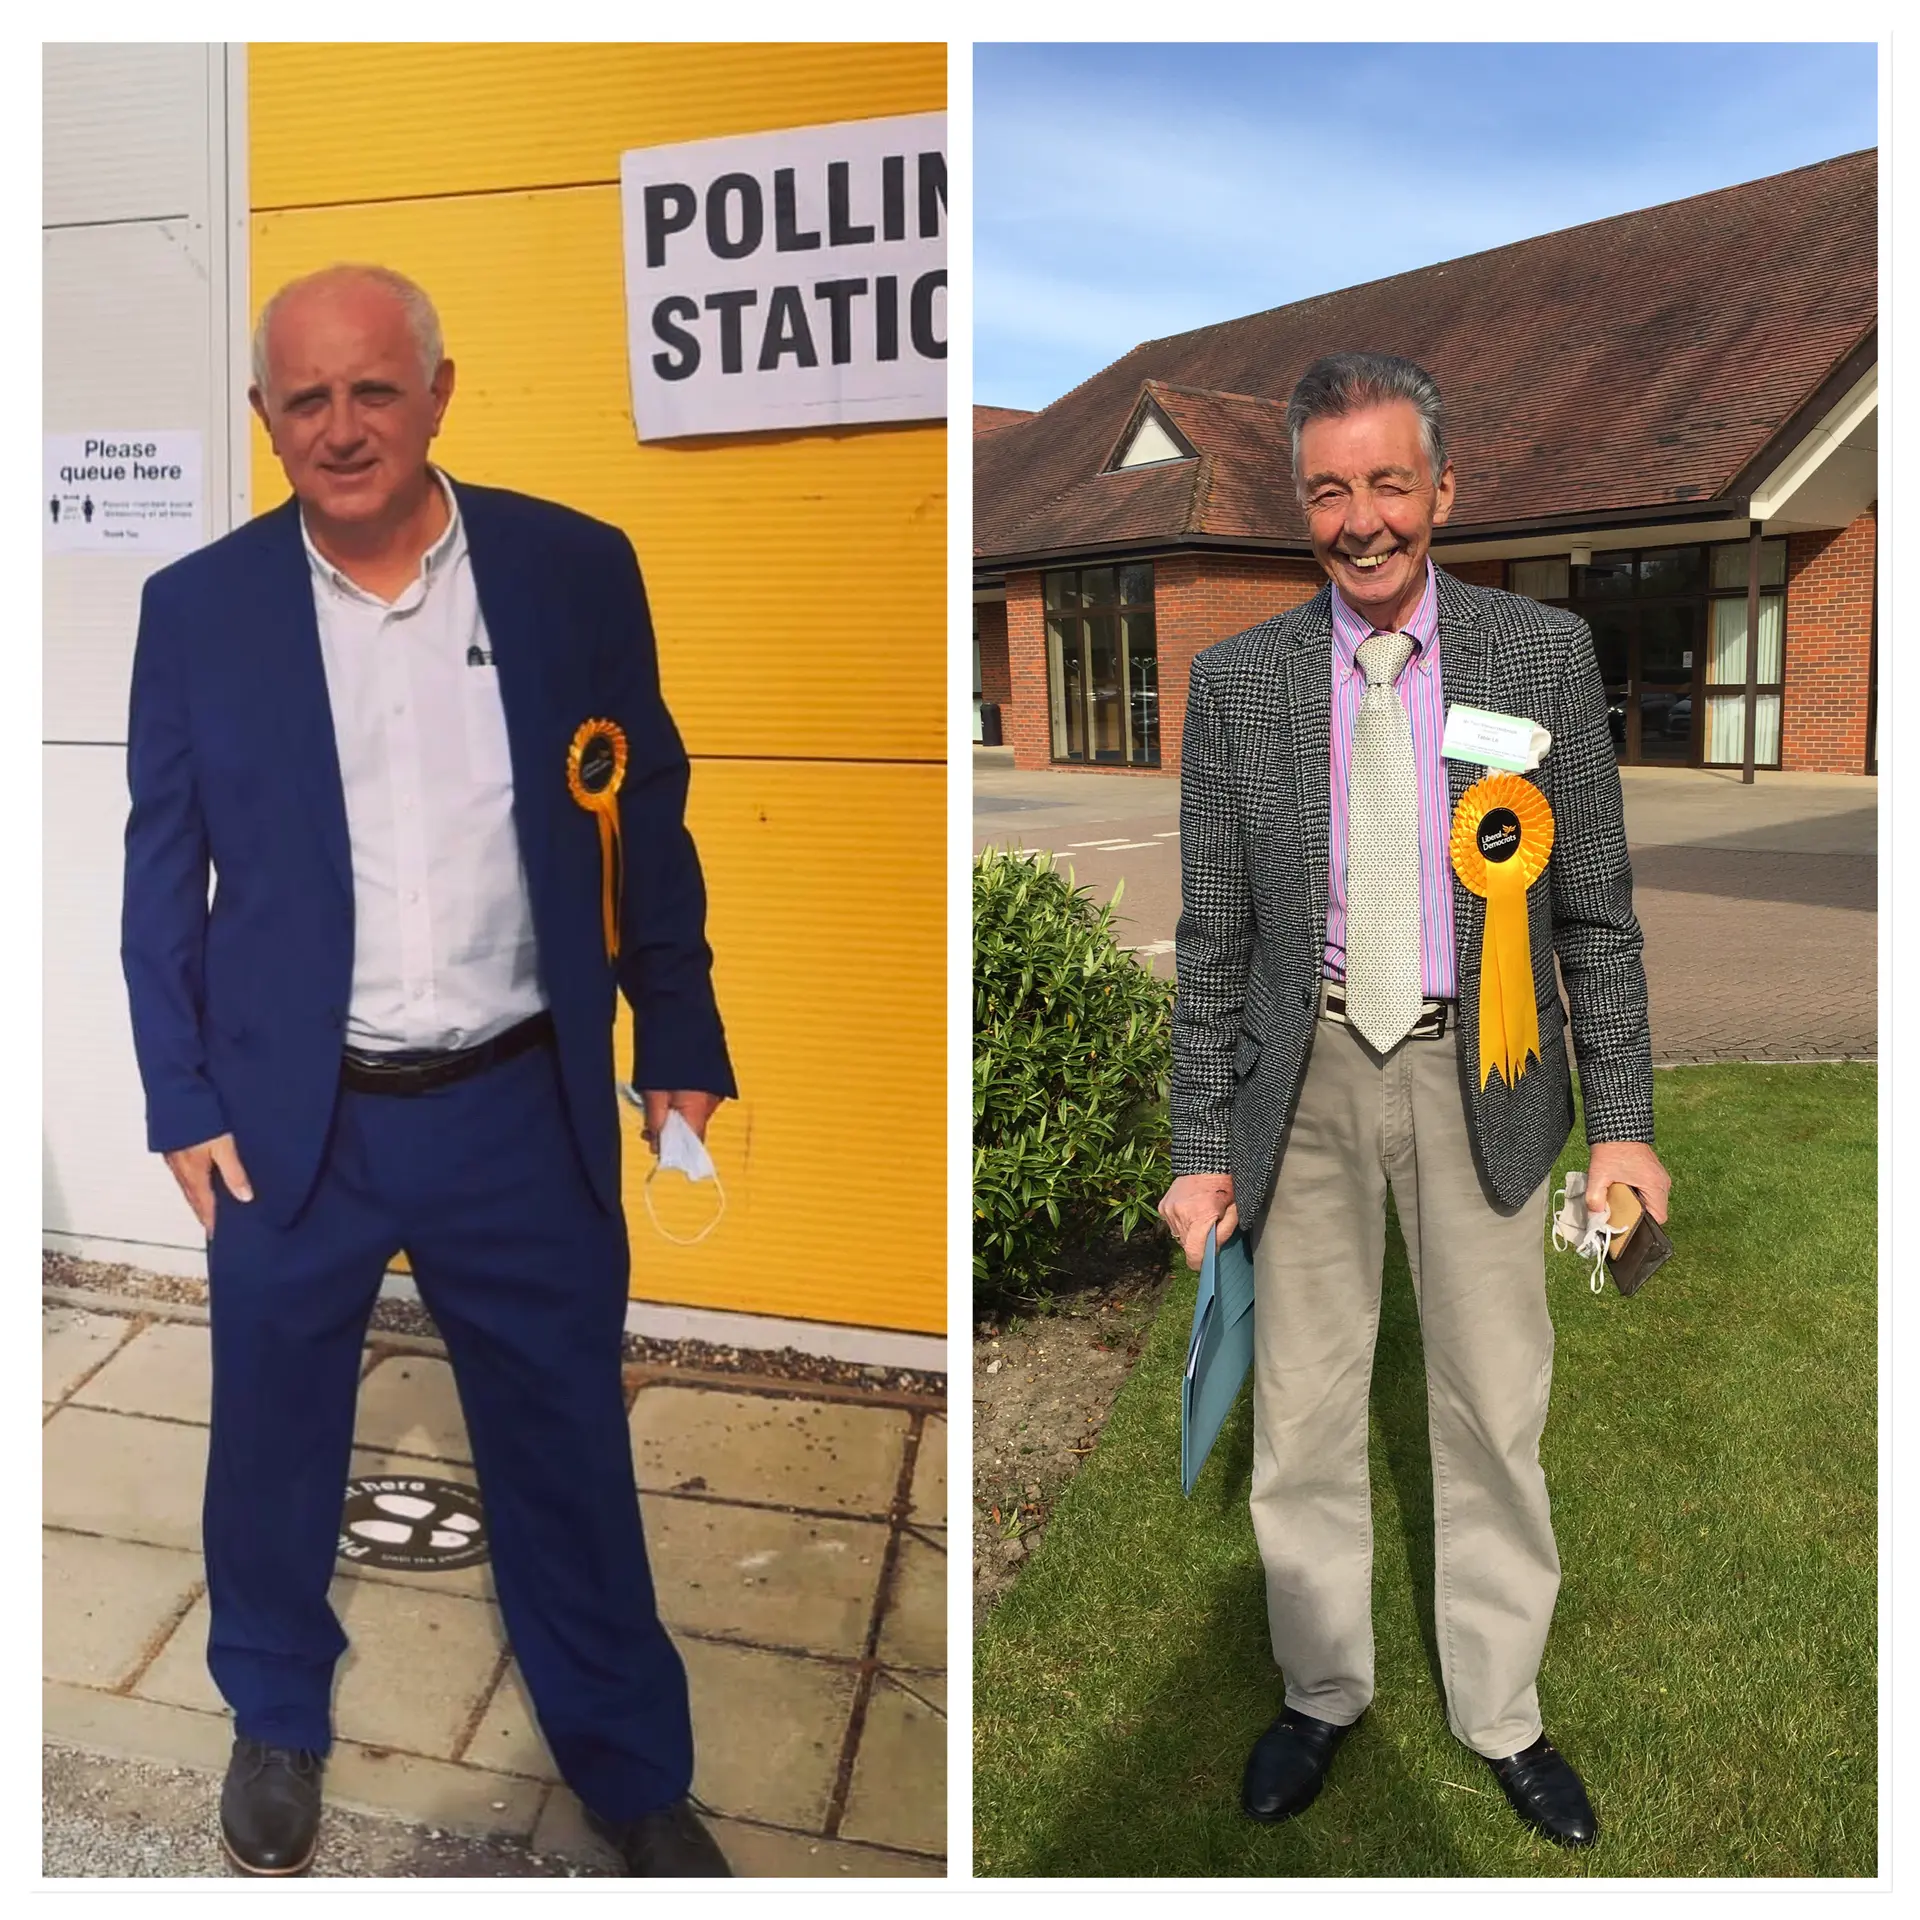 Steve Murphy (left) and Paul Holbrook (right) newly elected LibDem councillors May 2021